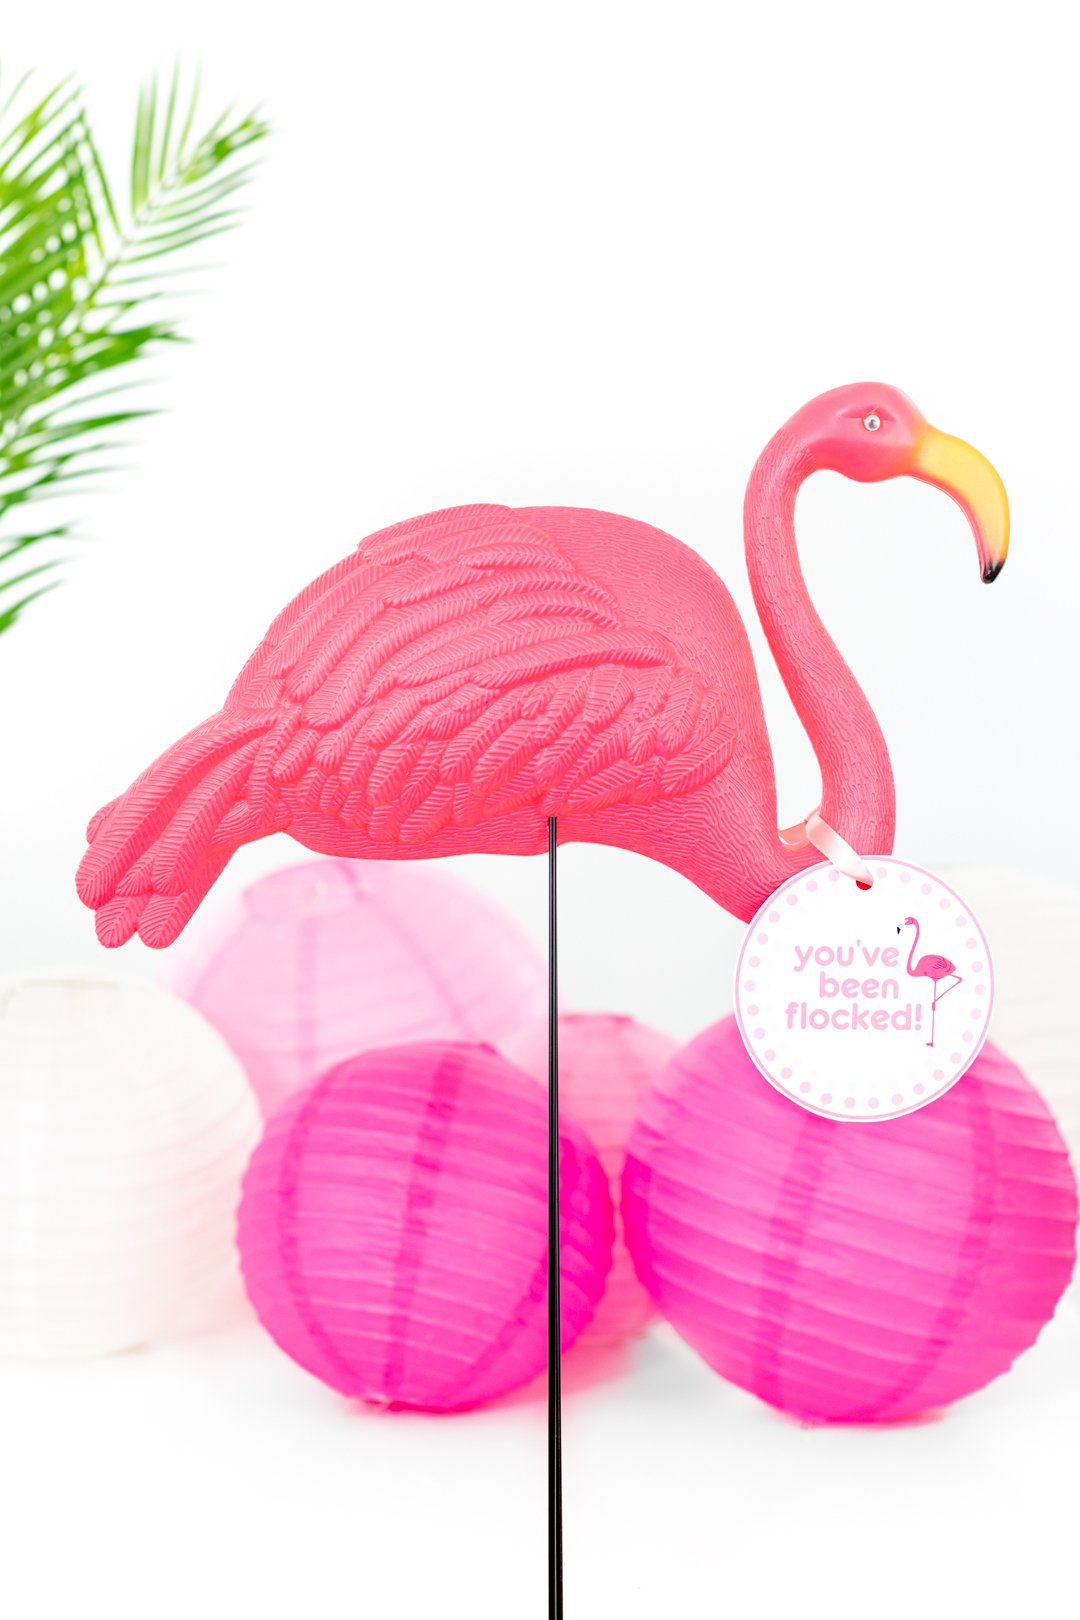 plastic yard flamingo in a party scene with paper lantern decorations